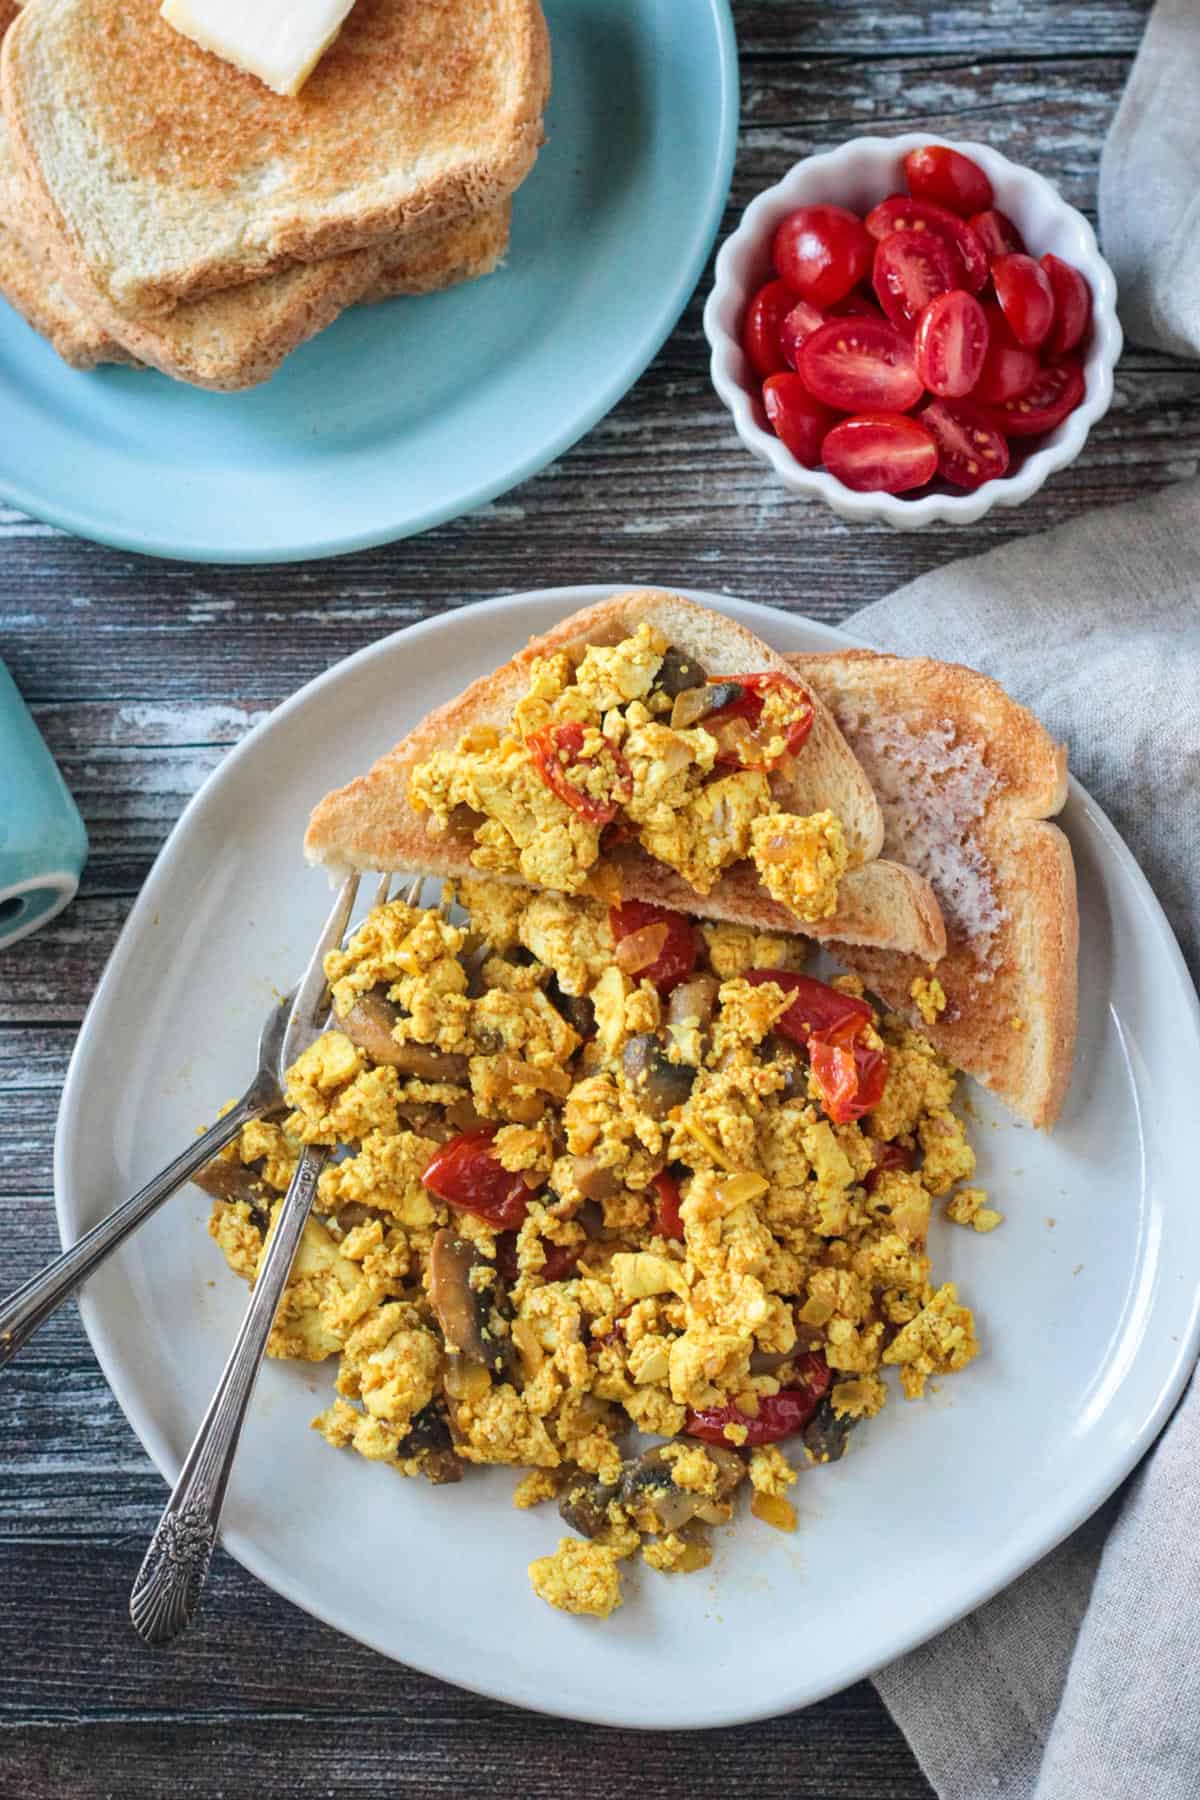 Two forks on a plate with vegan scrambled eggs and toast.